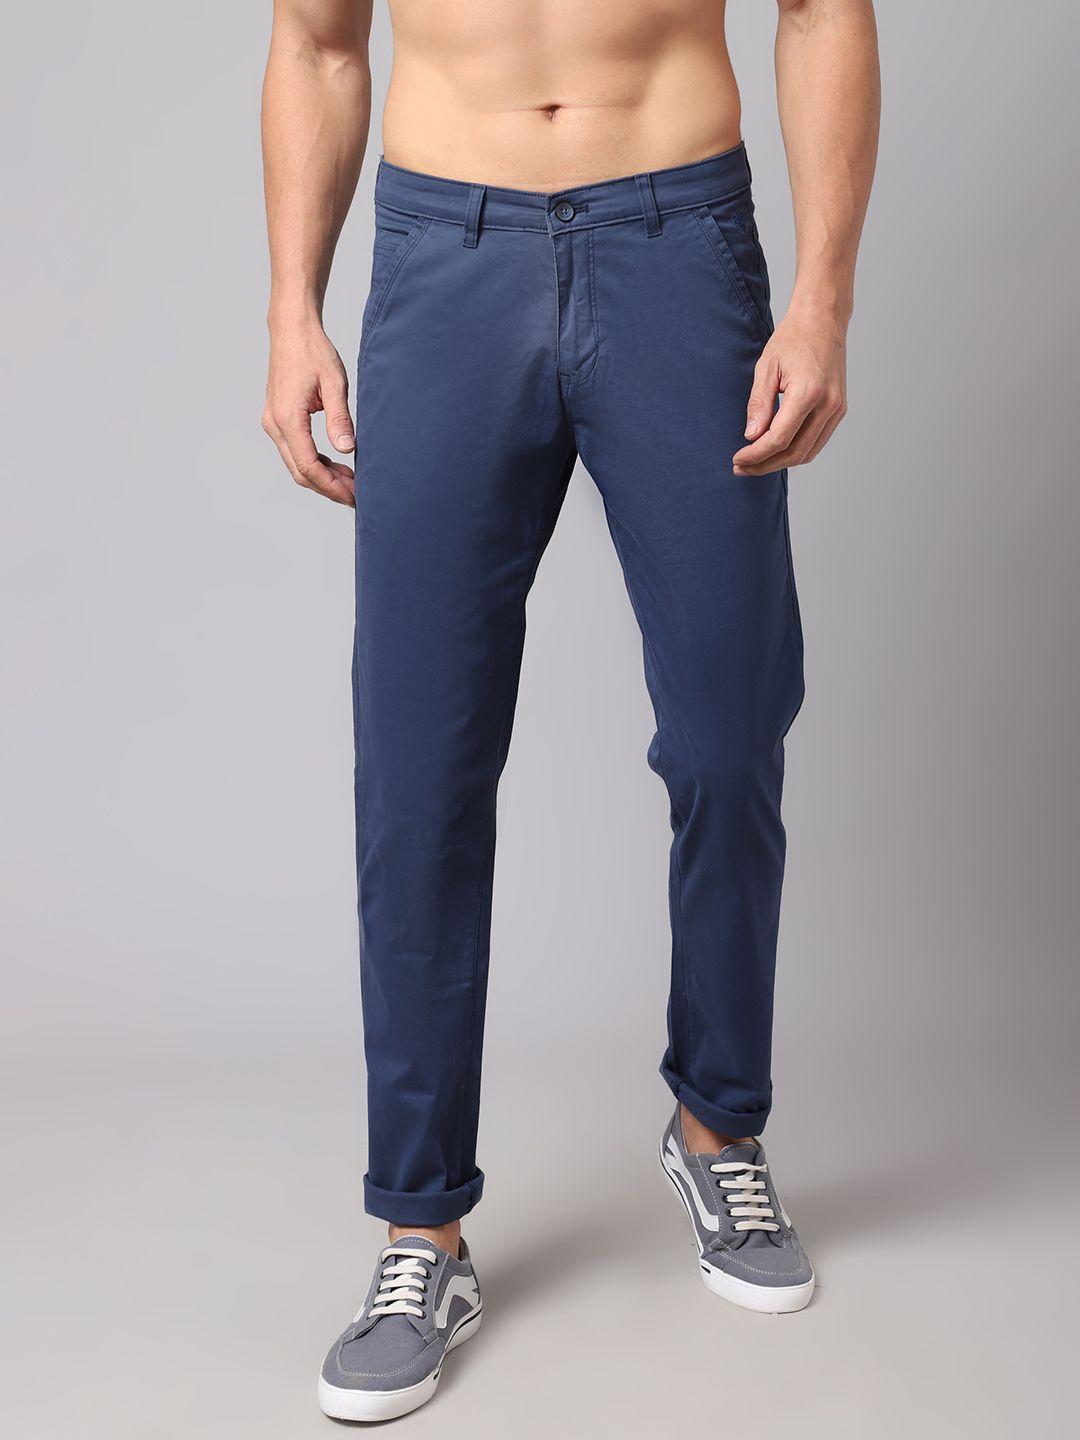 cantabil-men-blue-chinos-cotton-trousers